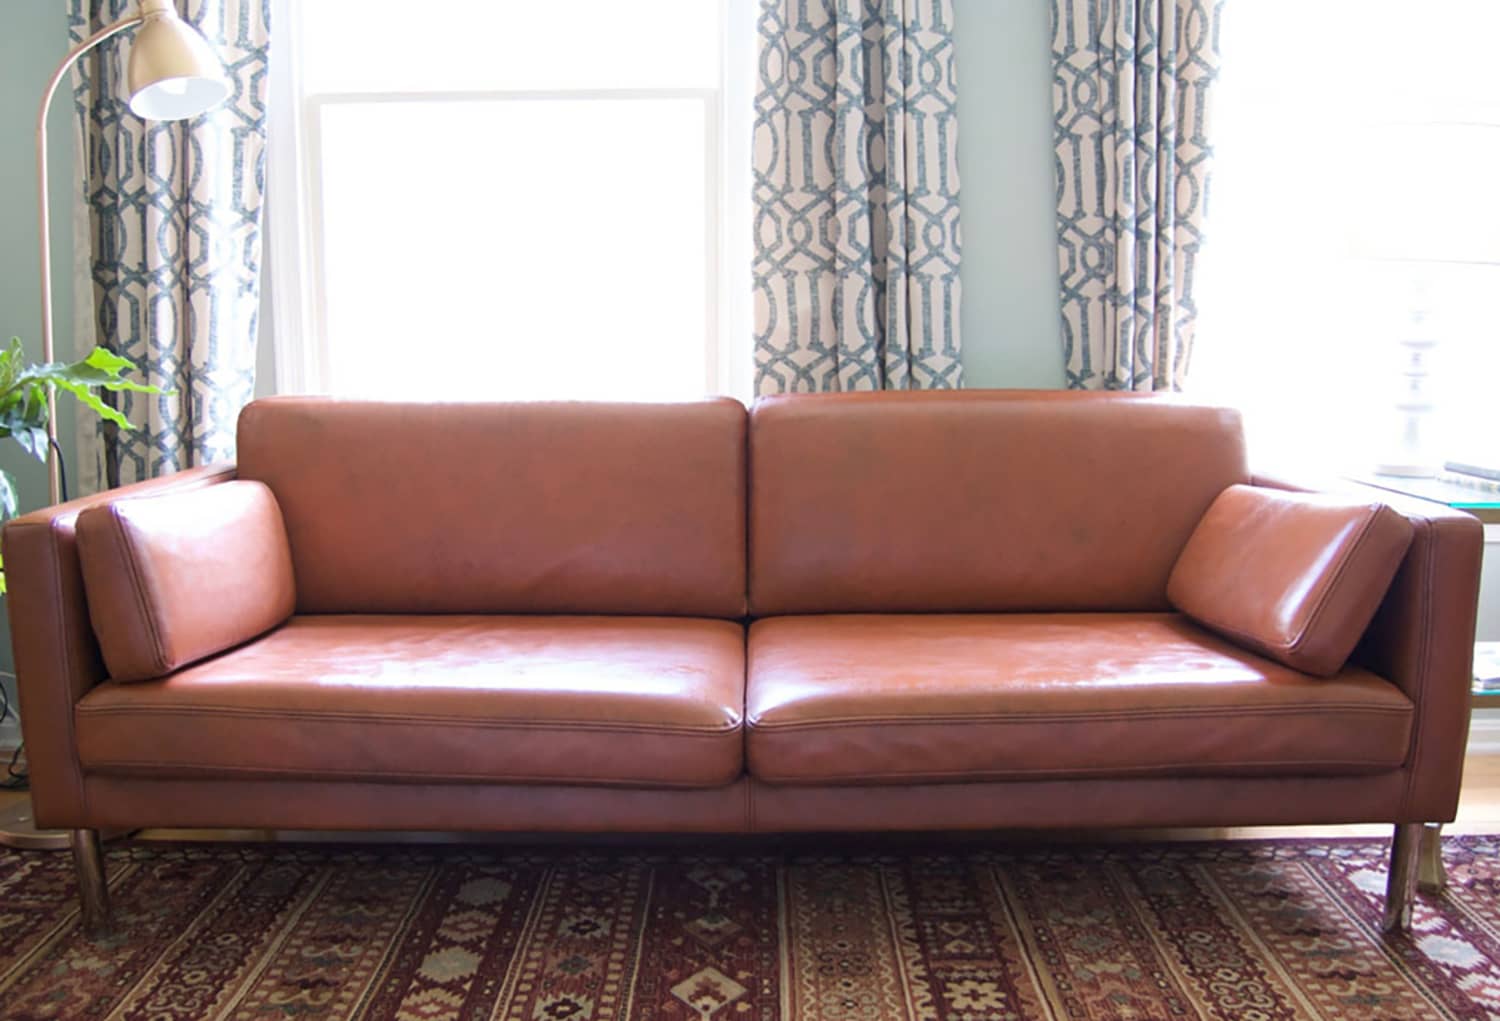 paint to paint leather sofa